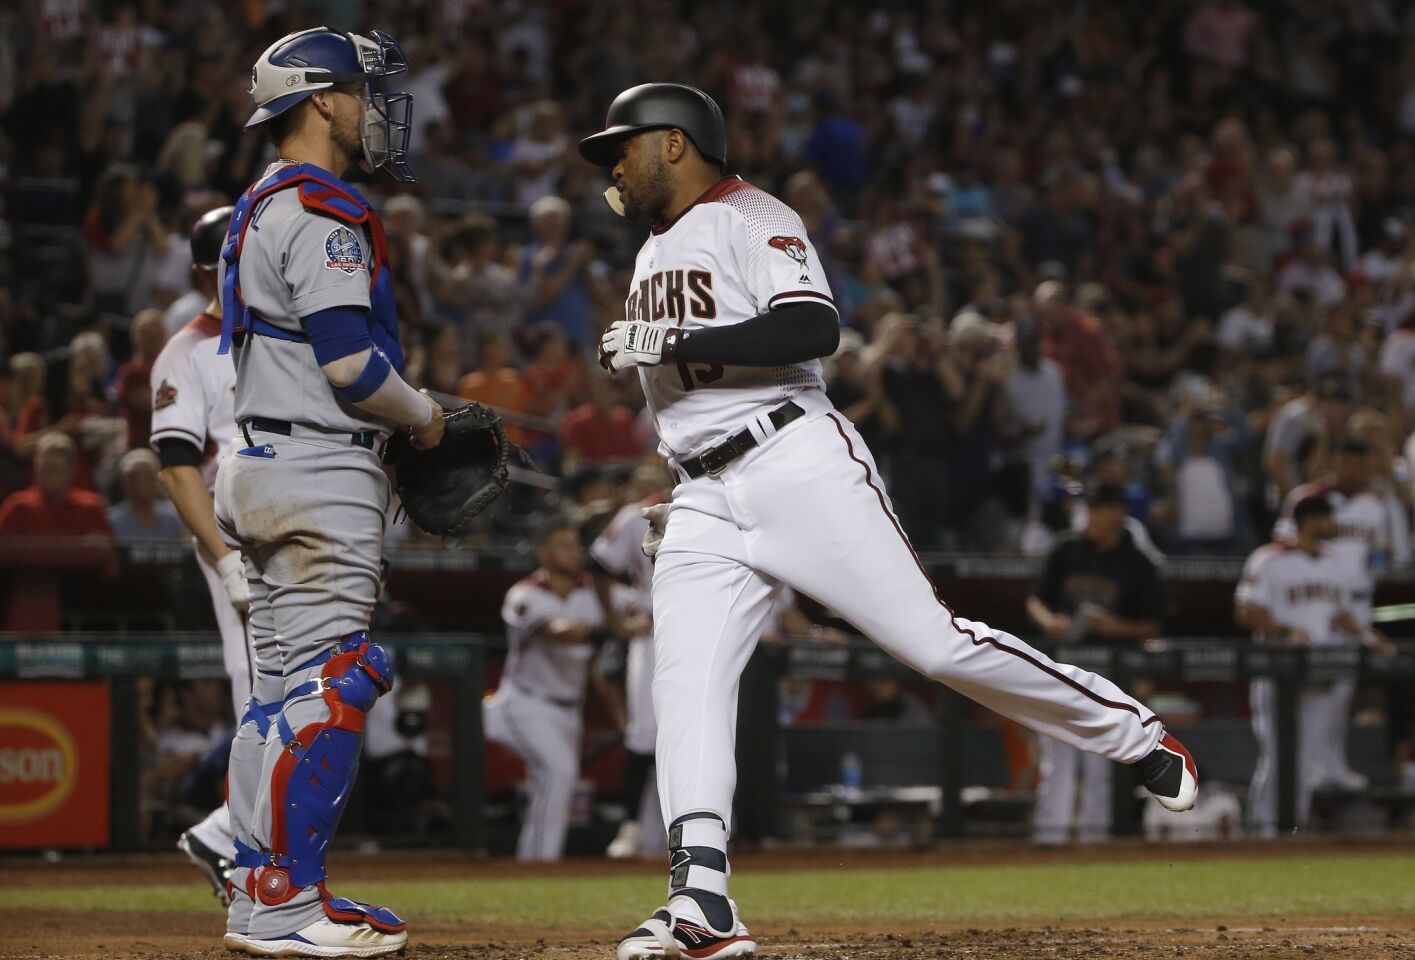 Arizona Diamondbacks' Socrates Brito, right, crosses home plate after hitting a home run as Los Angeles Dodgers catcher Yasmani Grandal, left, stands by during the second inning of a baseball game Wednesday, Sept. 26, 2018, in Phoenix. (AP Photo/Ross D. Franklin)